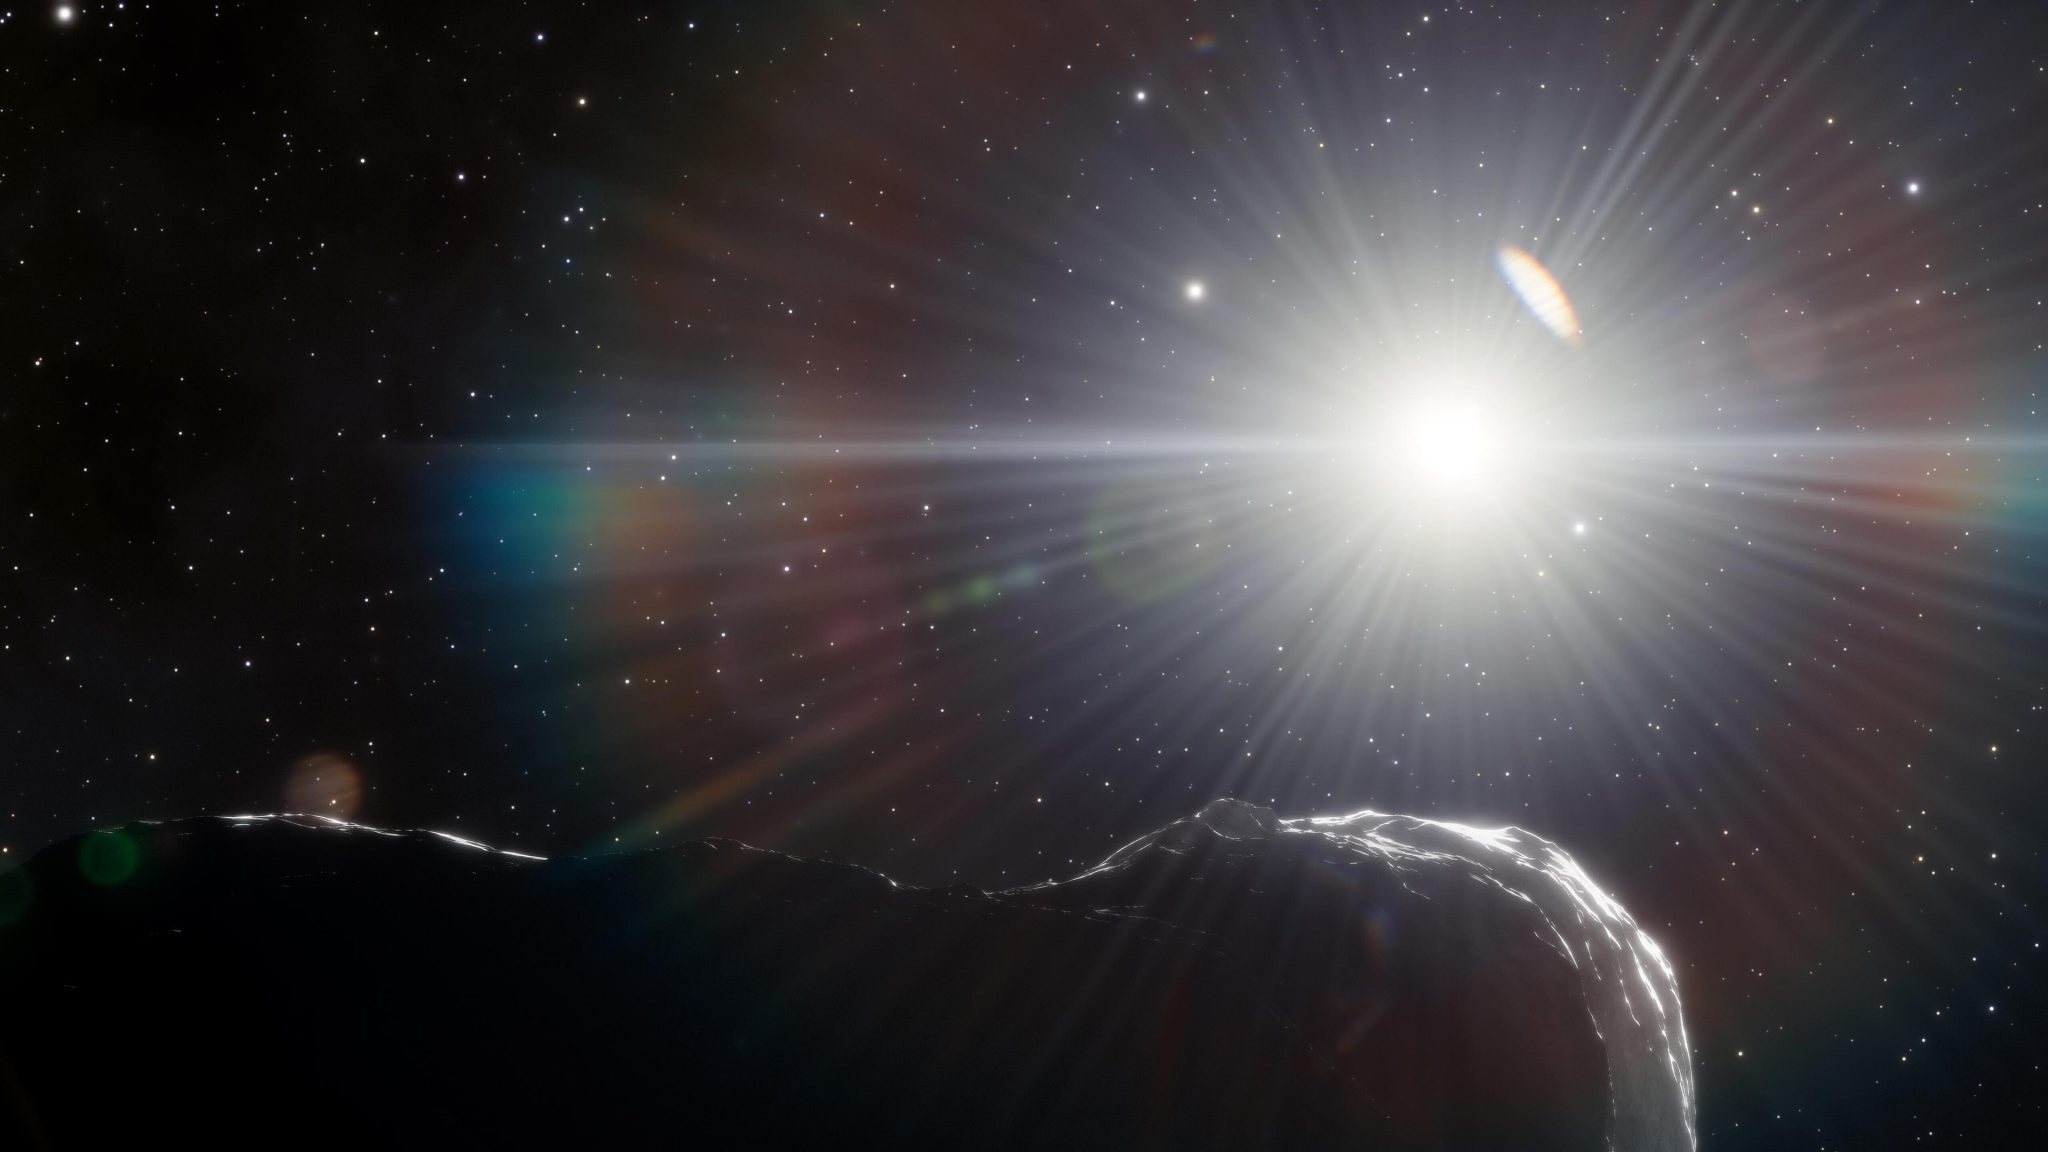 An asteroid orbits closer to the Sun than to the Earth's orbit